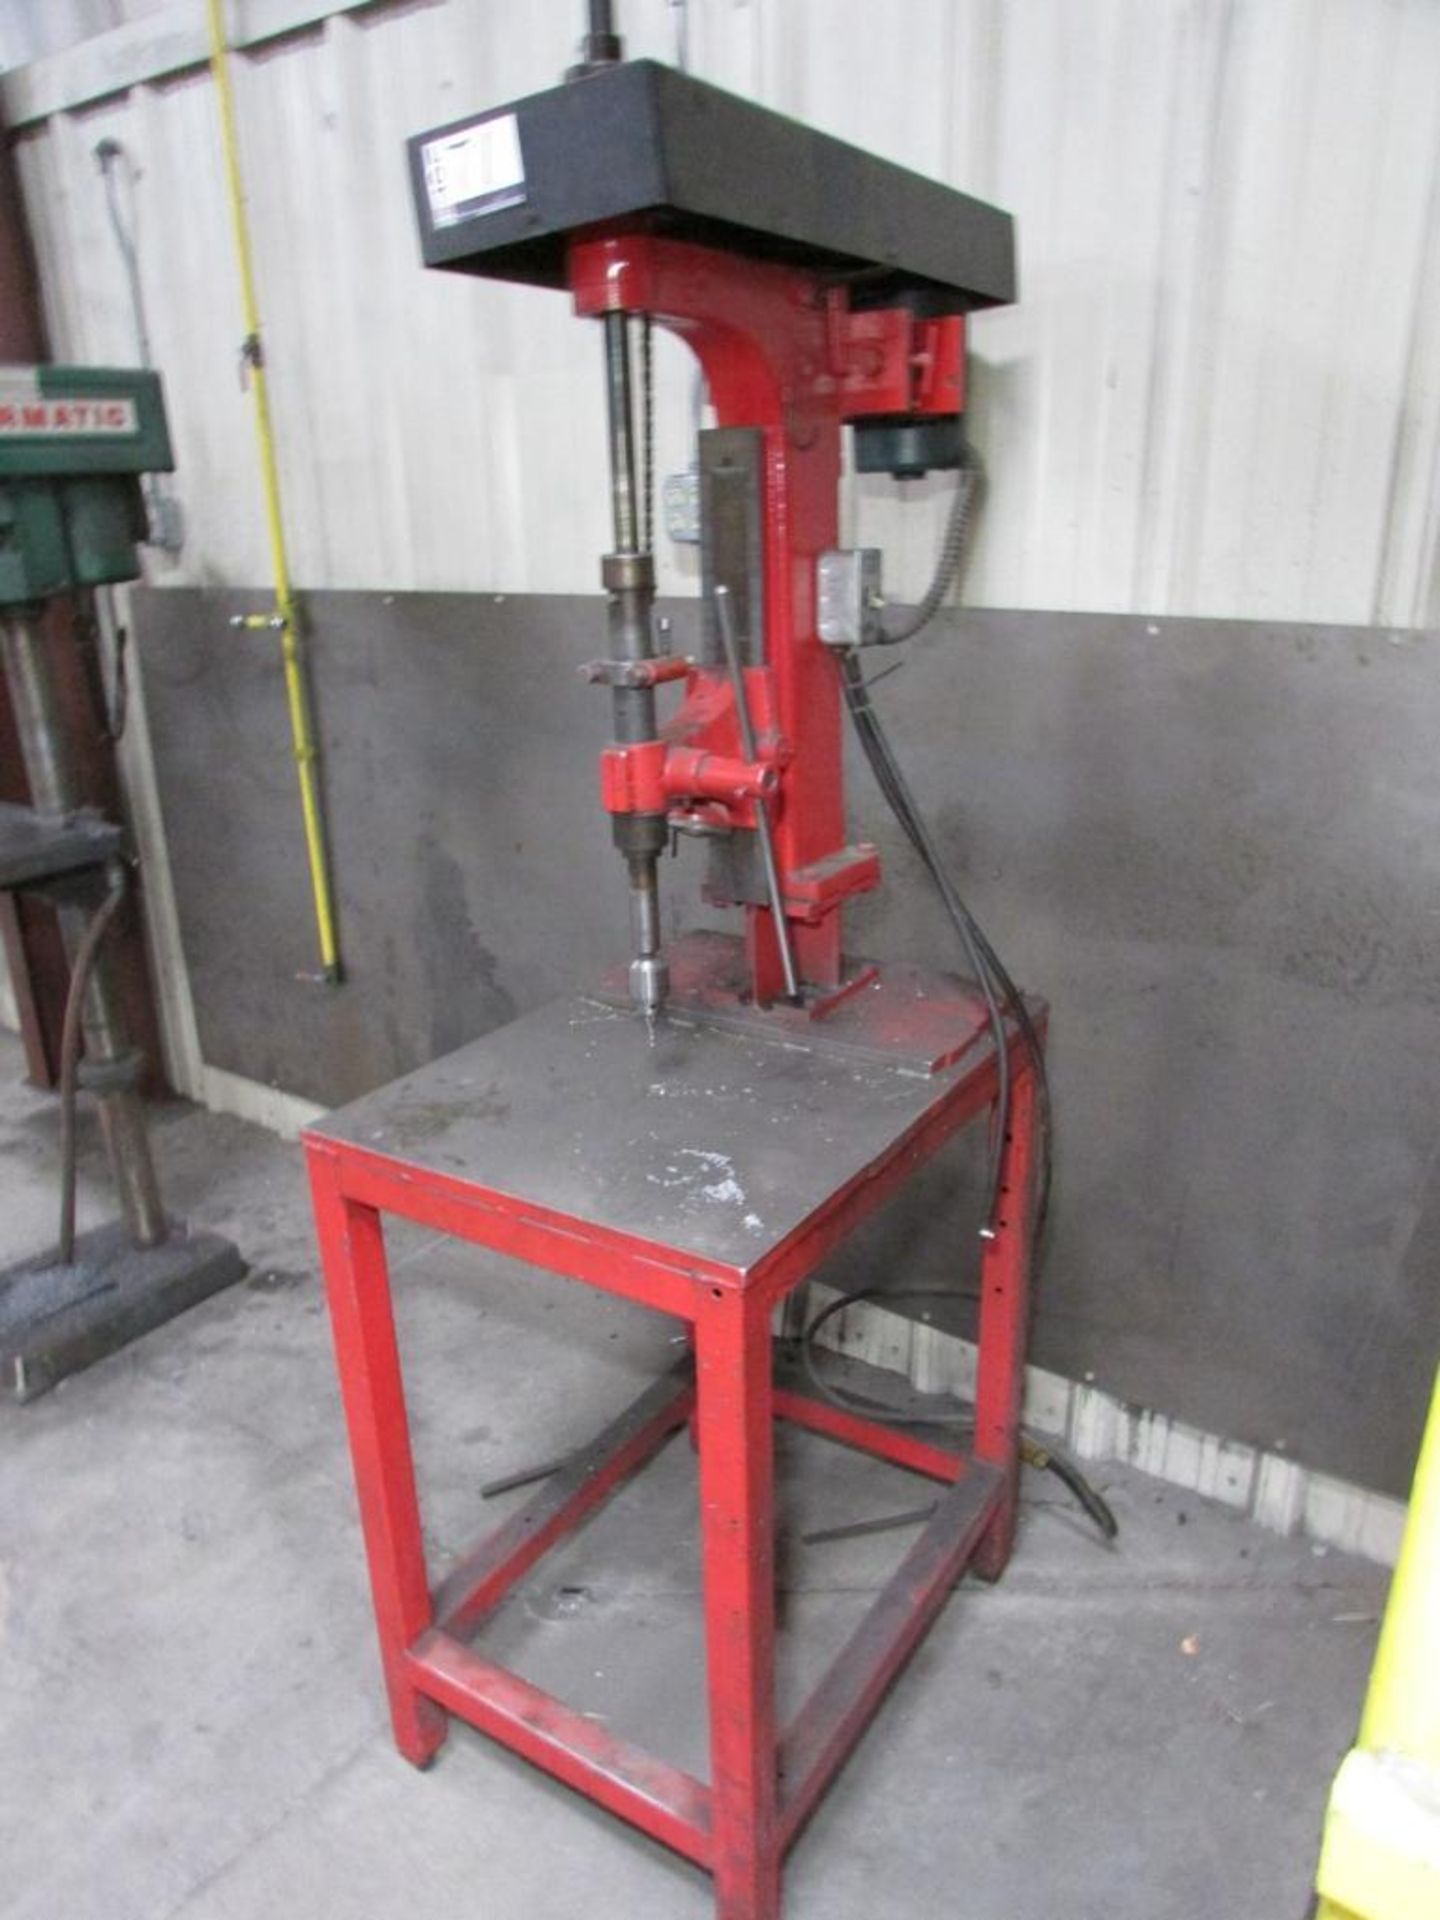 14" Benchtop Drill Press, 29" x 22" Steel Table, 1/2" Jacobs Chuck, 5" Stroke, 1/2HP - Image 3 of 6